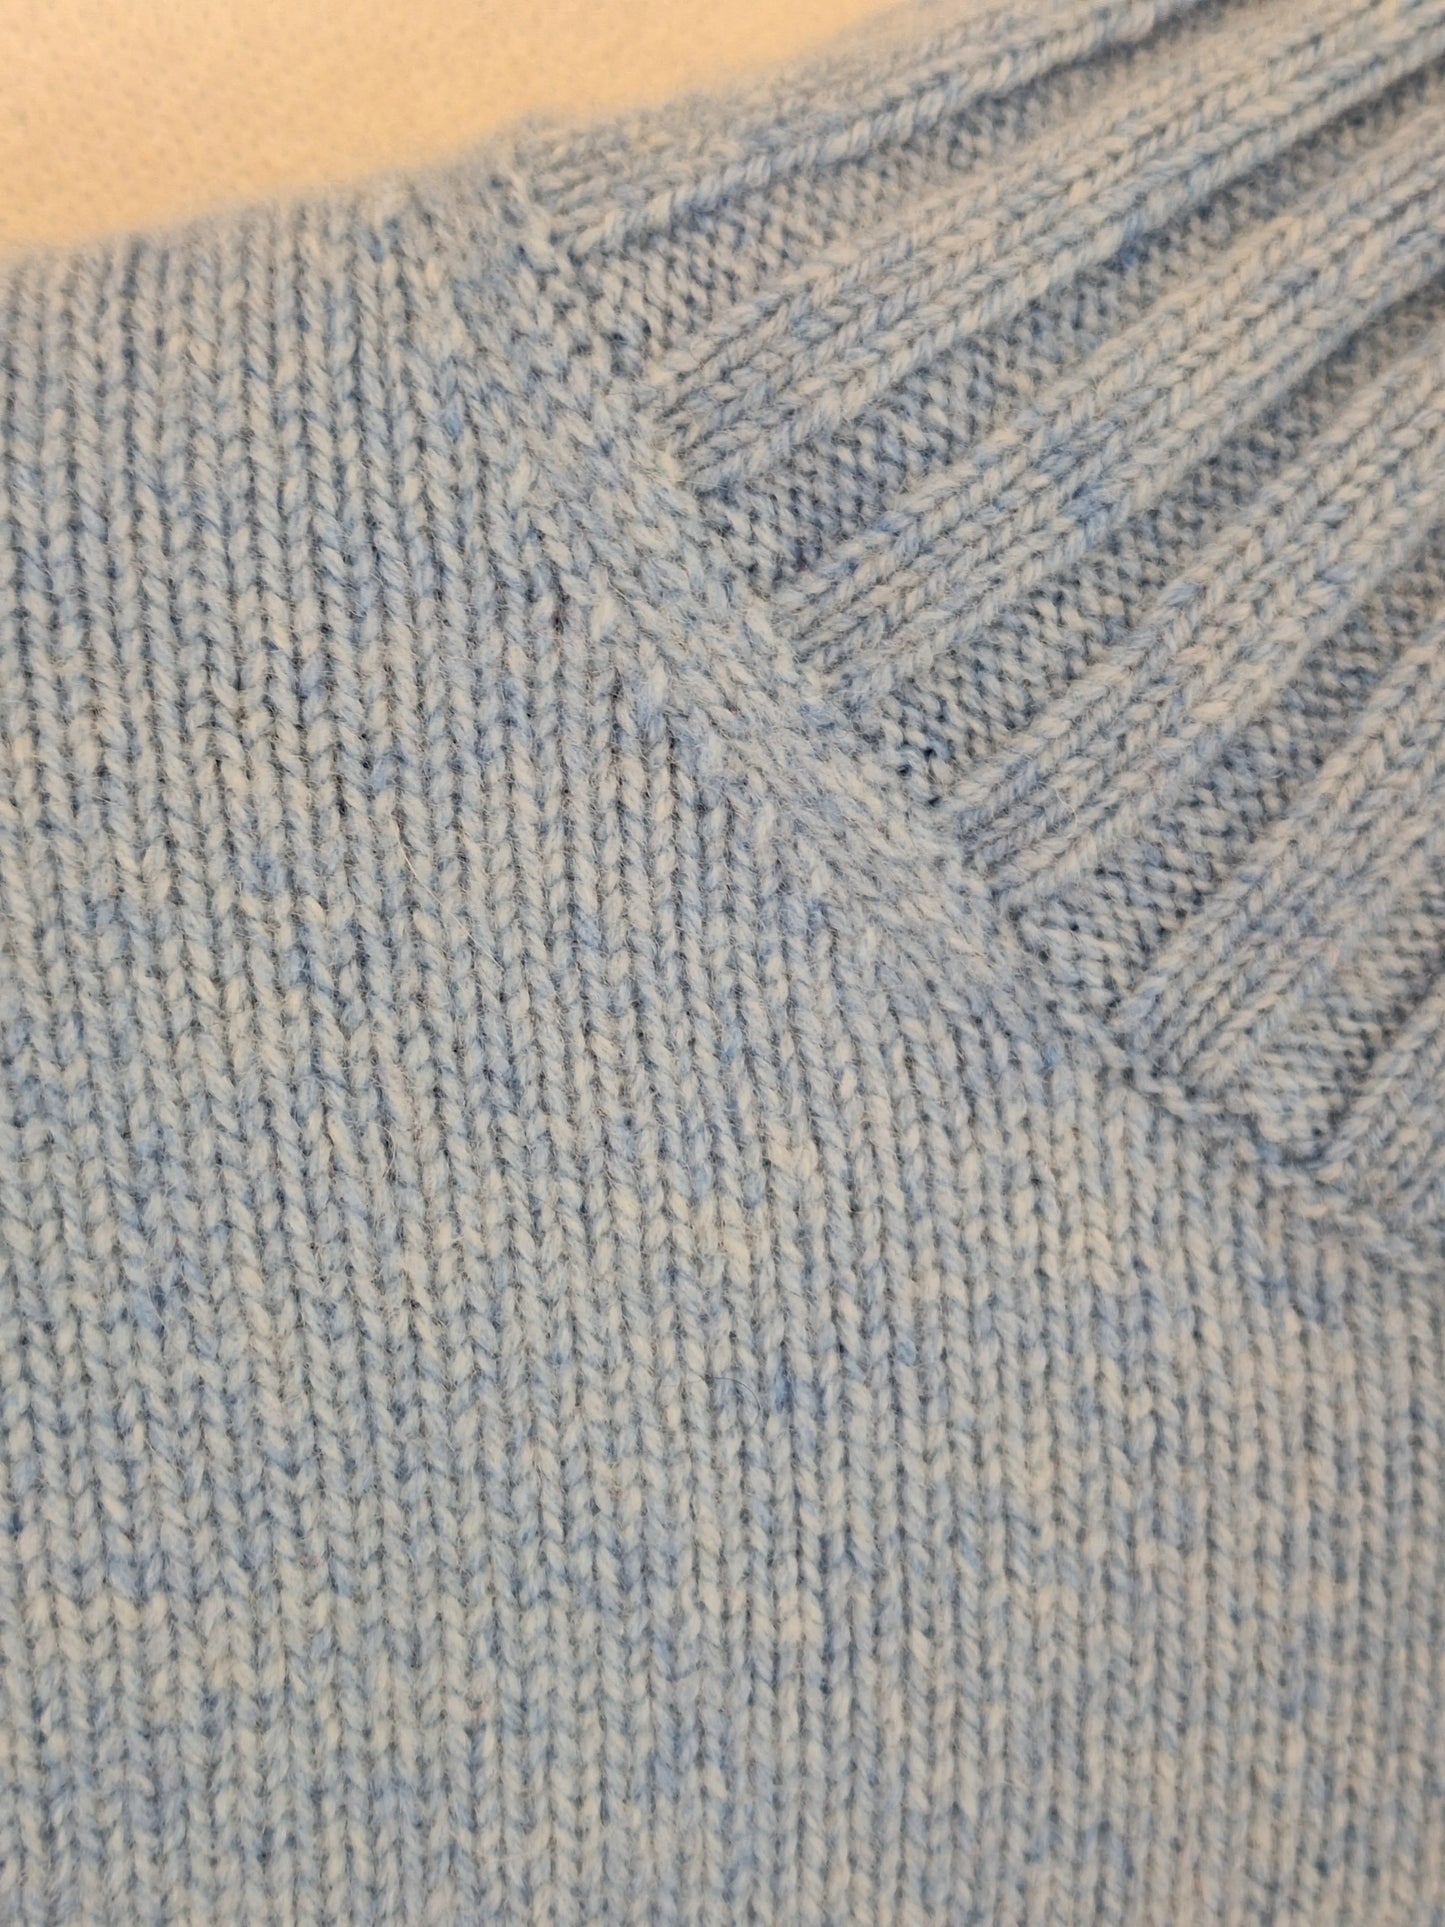 Aere Baby Blue Turtleneck Cropped Knit Jumper Size 12 by SwapUp-Online Second Hand Store-Online Thrift Store